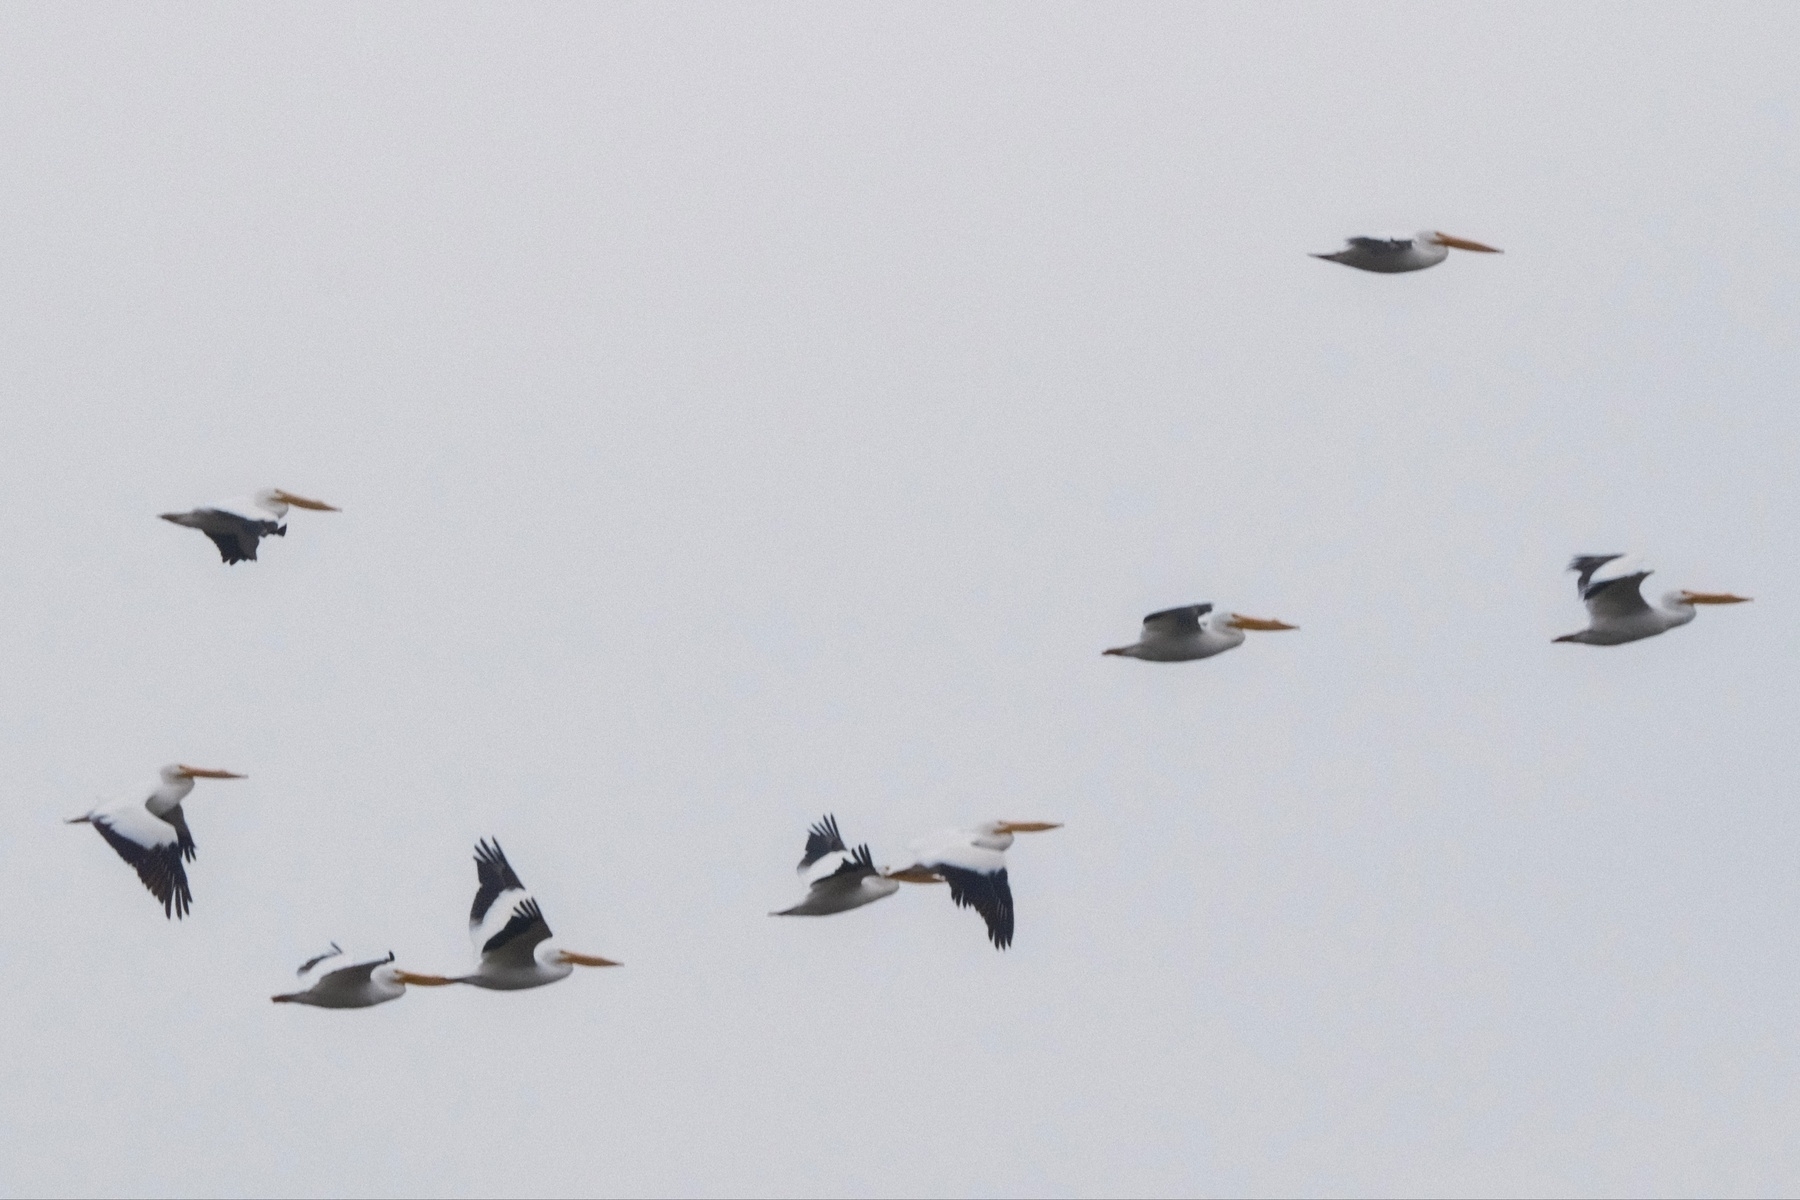 White and black pelicans fly under an overcast sky.